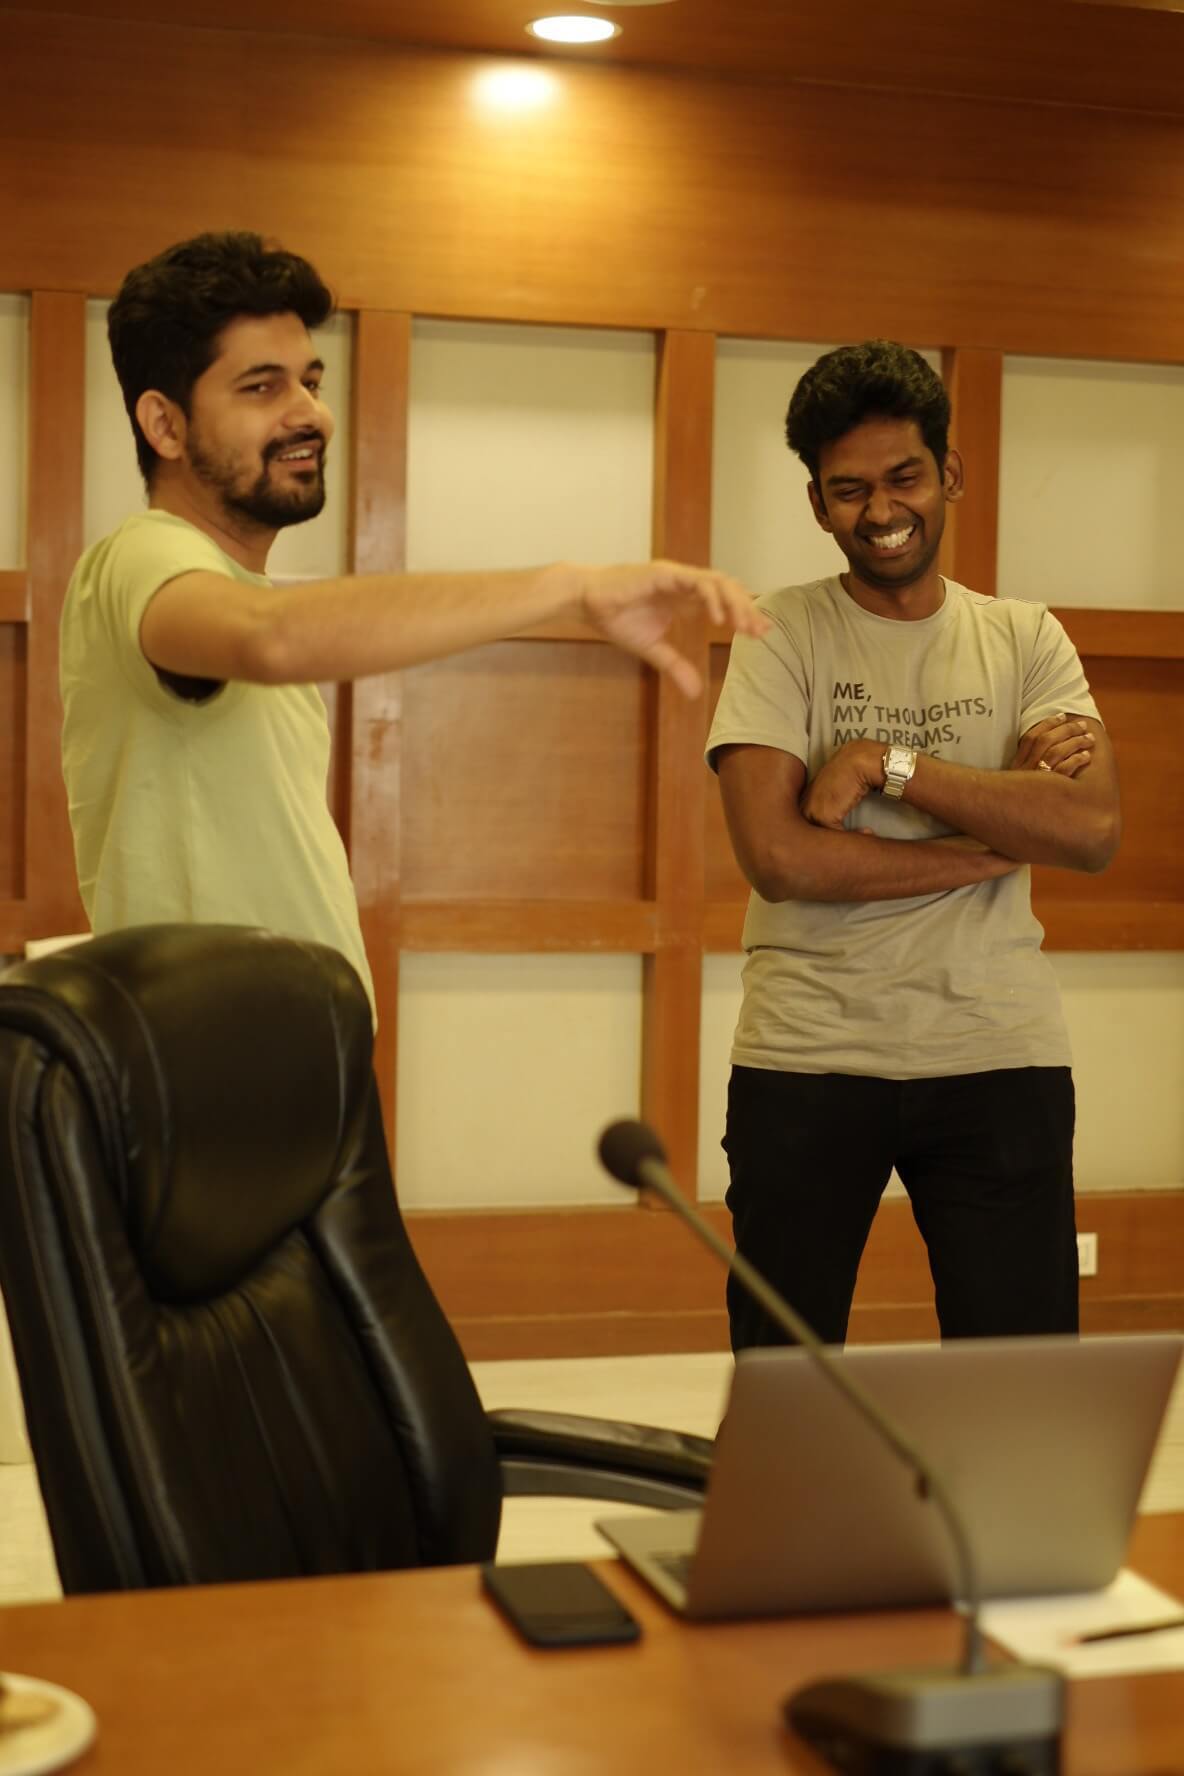 Ganesh and Sudhakar in the conference room having a fun time